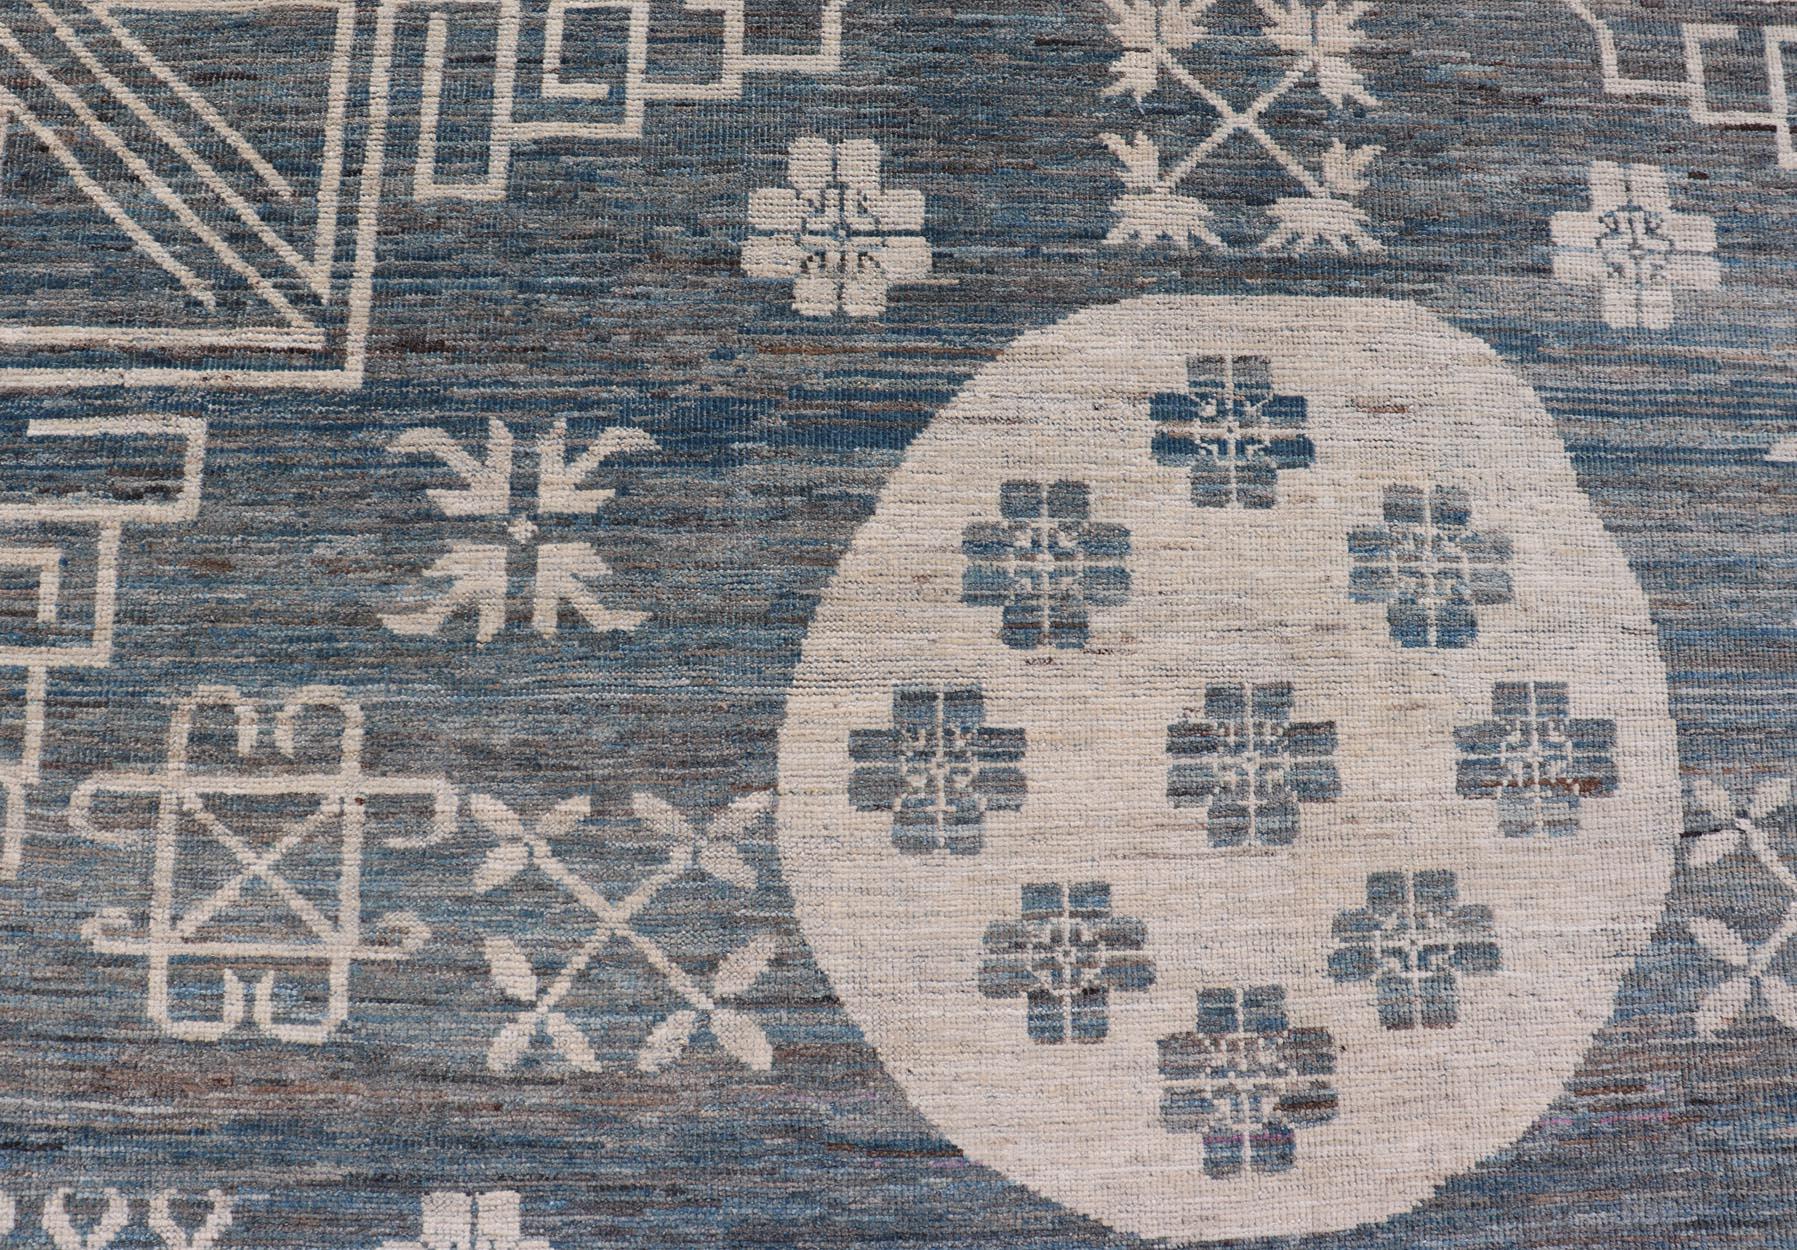 Hand-Knotted Modern Khotan Rug with Circular Medallions in Shades of Steel Blue & off White For Sale